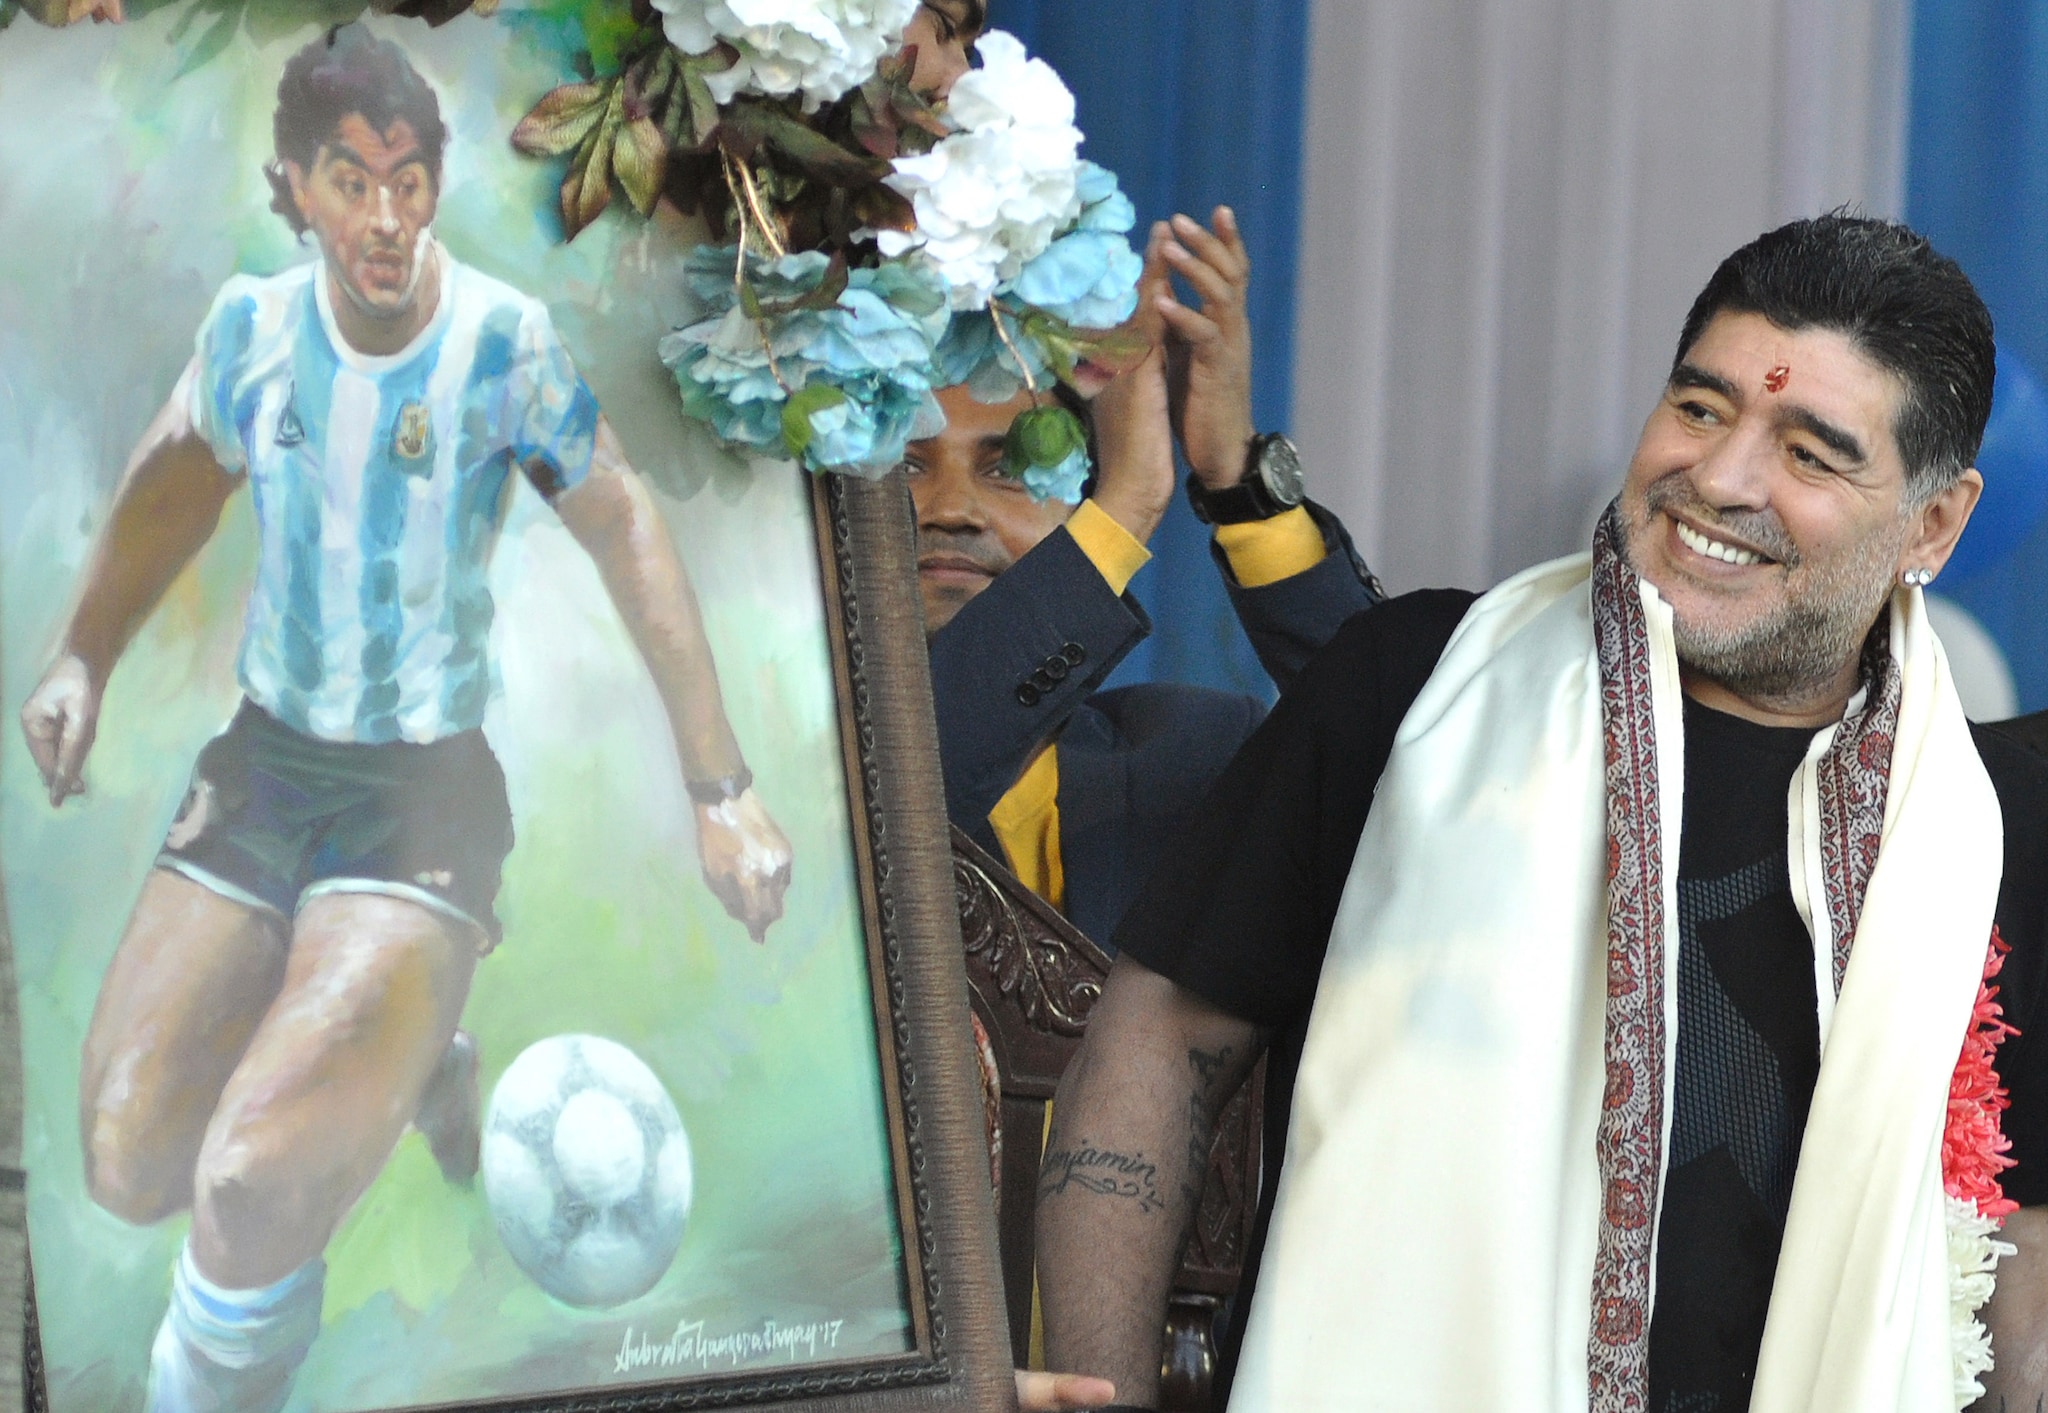  Argentine footballer Diego Maradona looks at his portrait during a visit in the Indian city of Kolkata on December 11, 2017. - Maradona is on a private visit to India. (Photo: AFP)